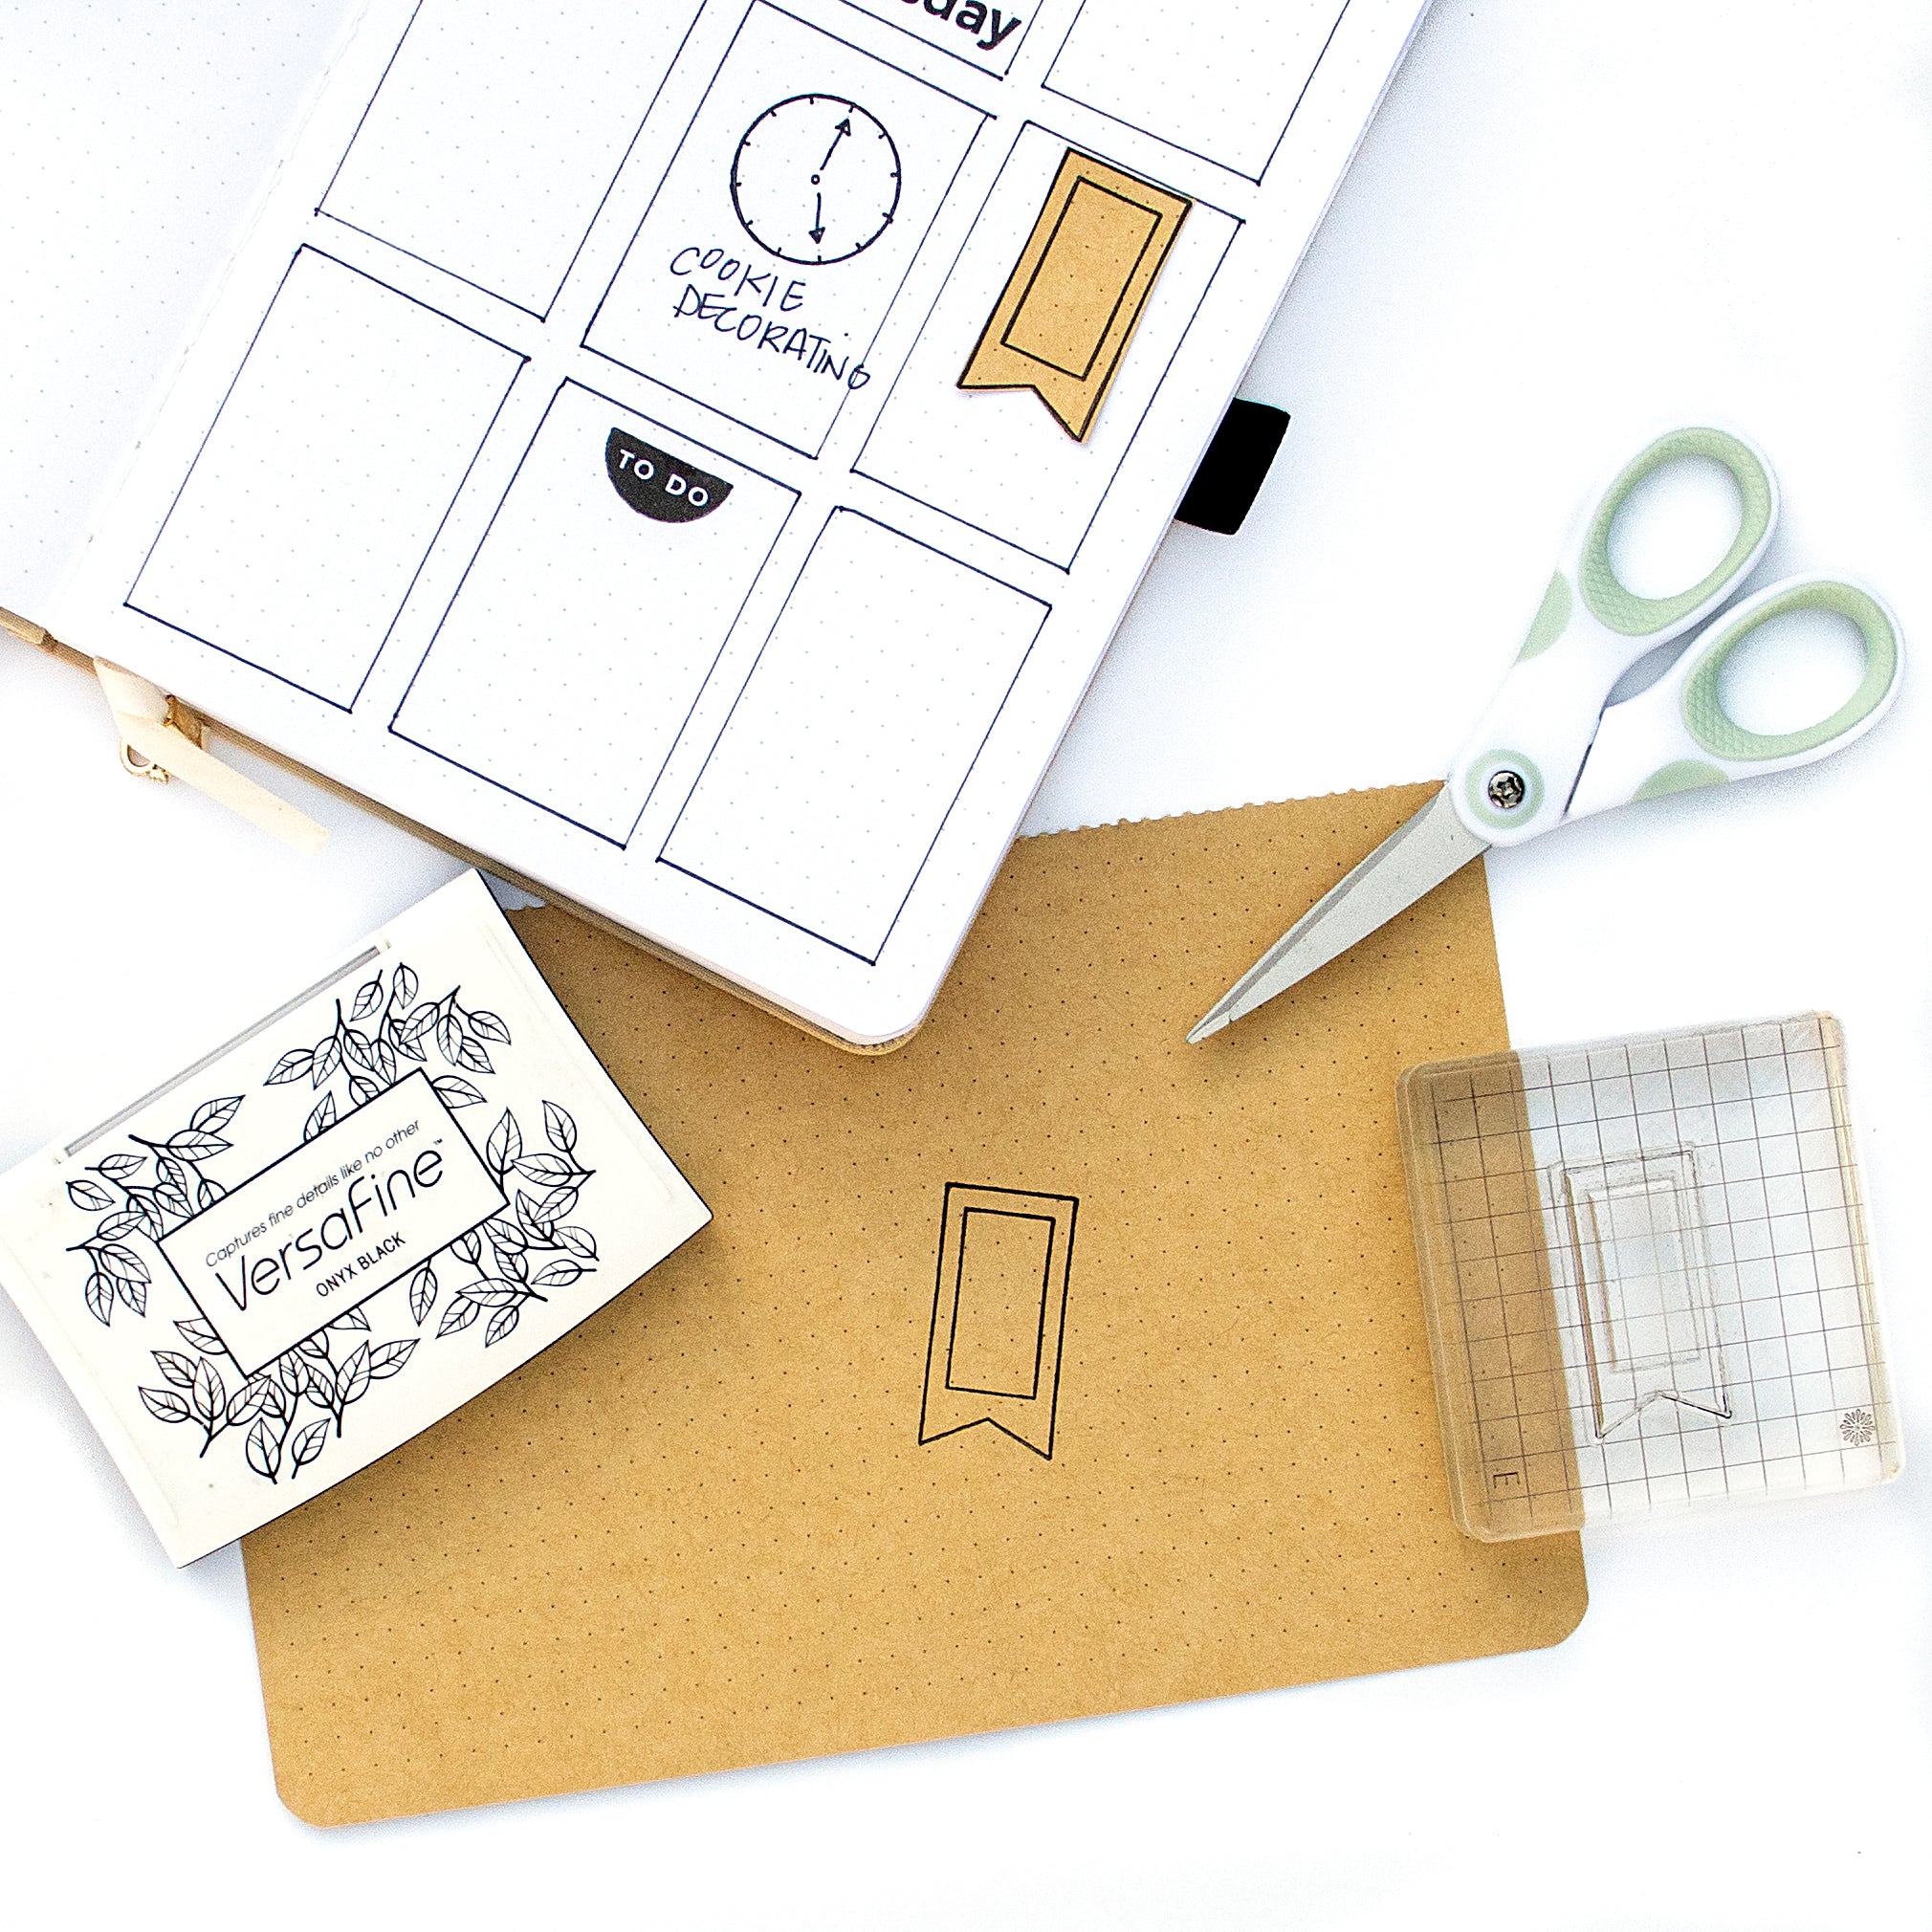 Leave Your Mark: Custom Stamp Designs that Make a Statement